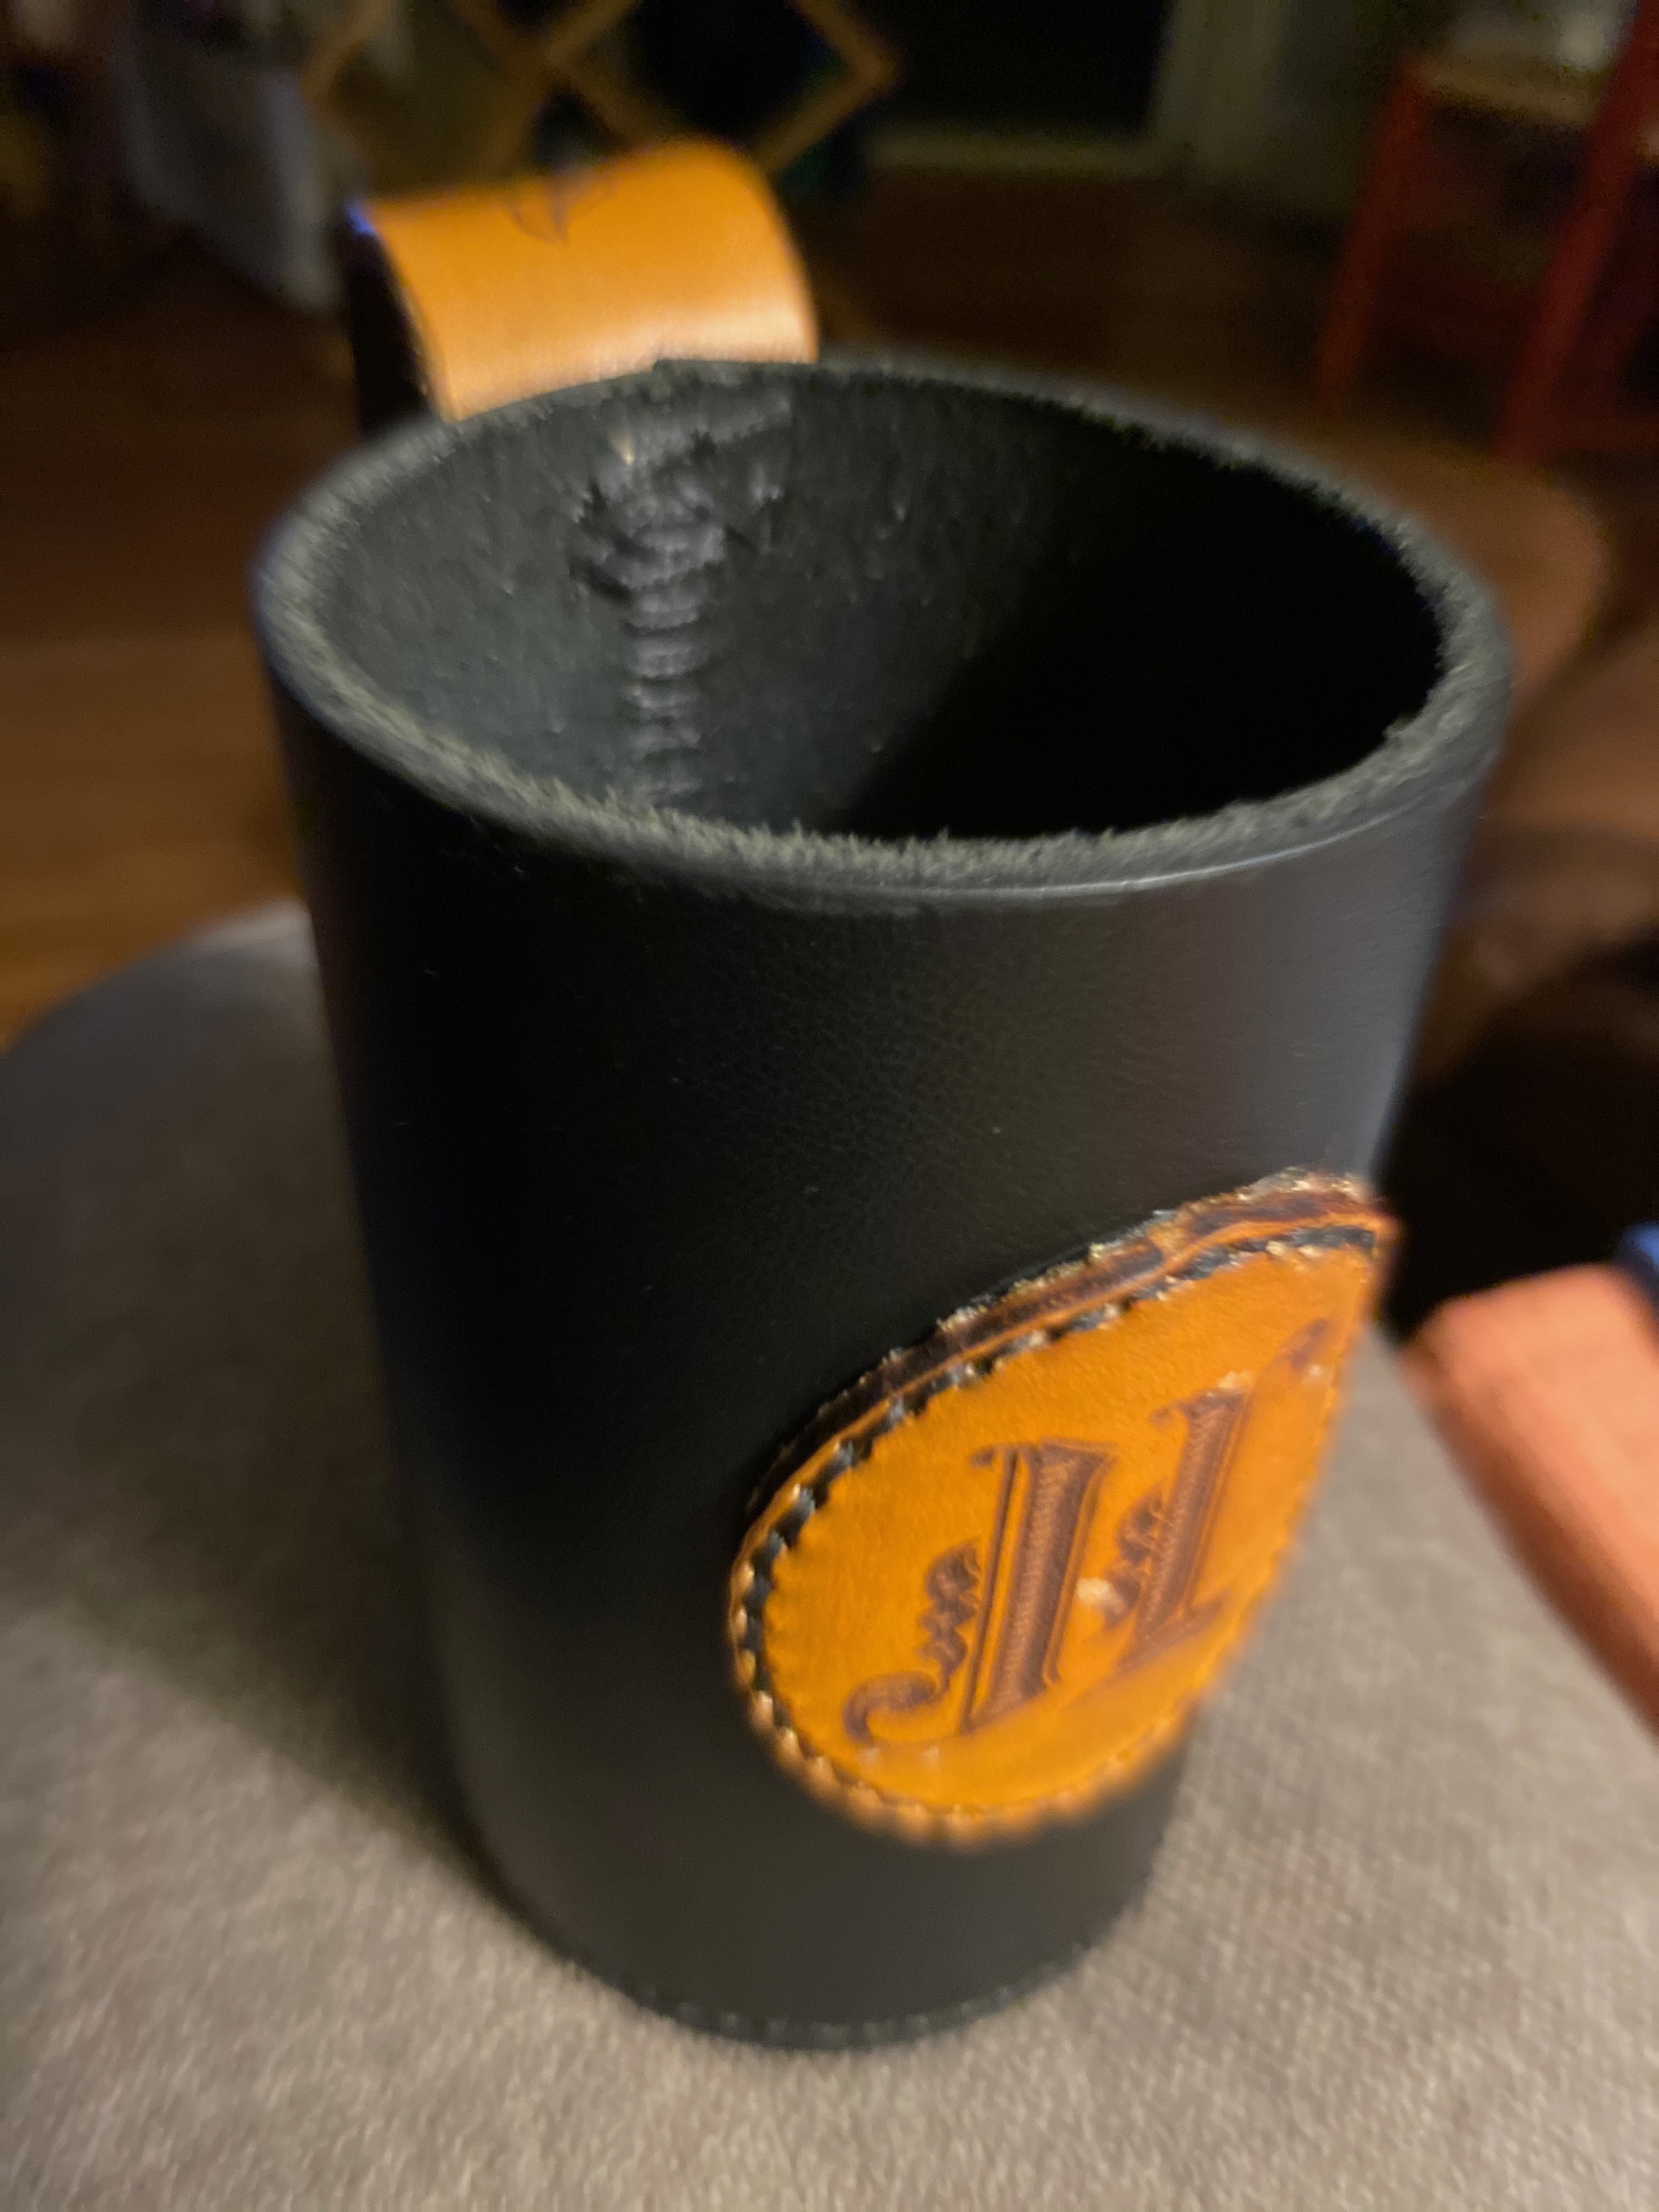 First coozie emblem